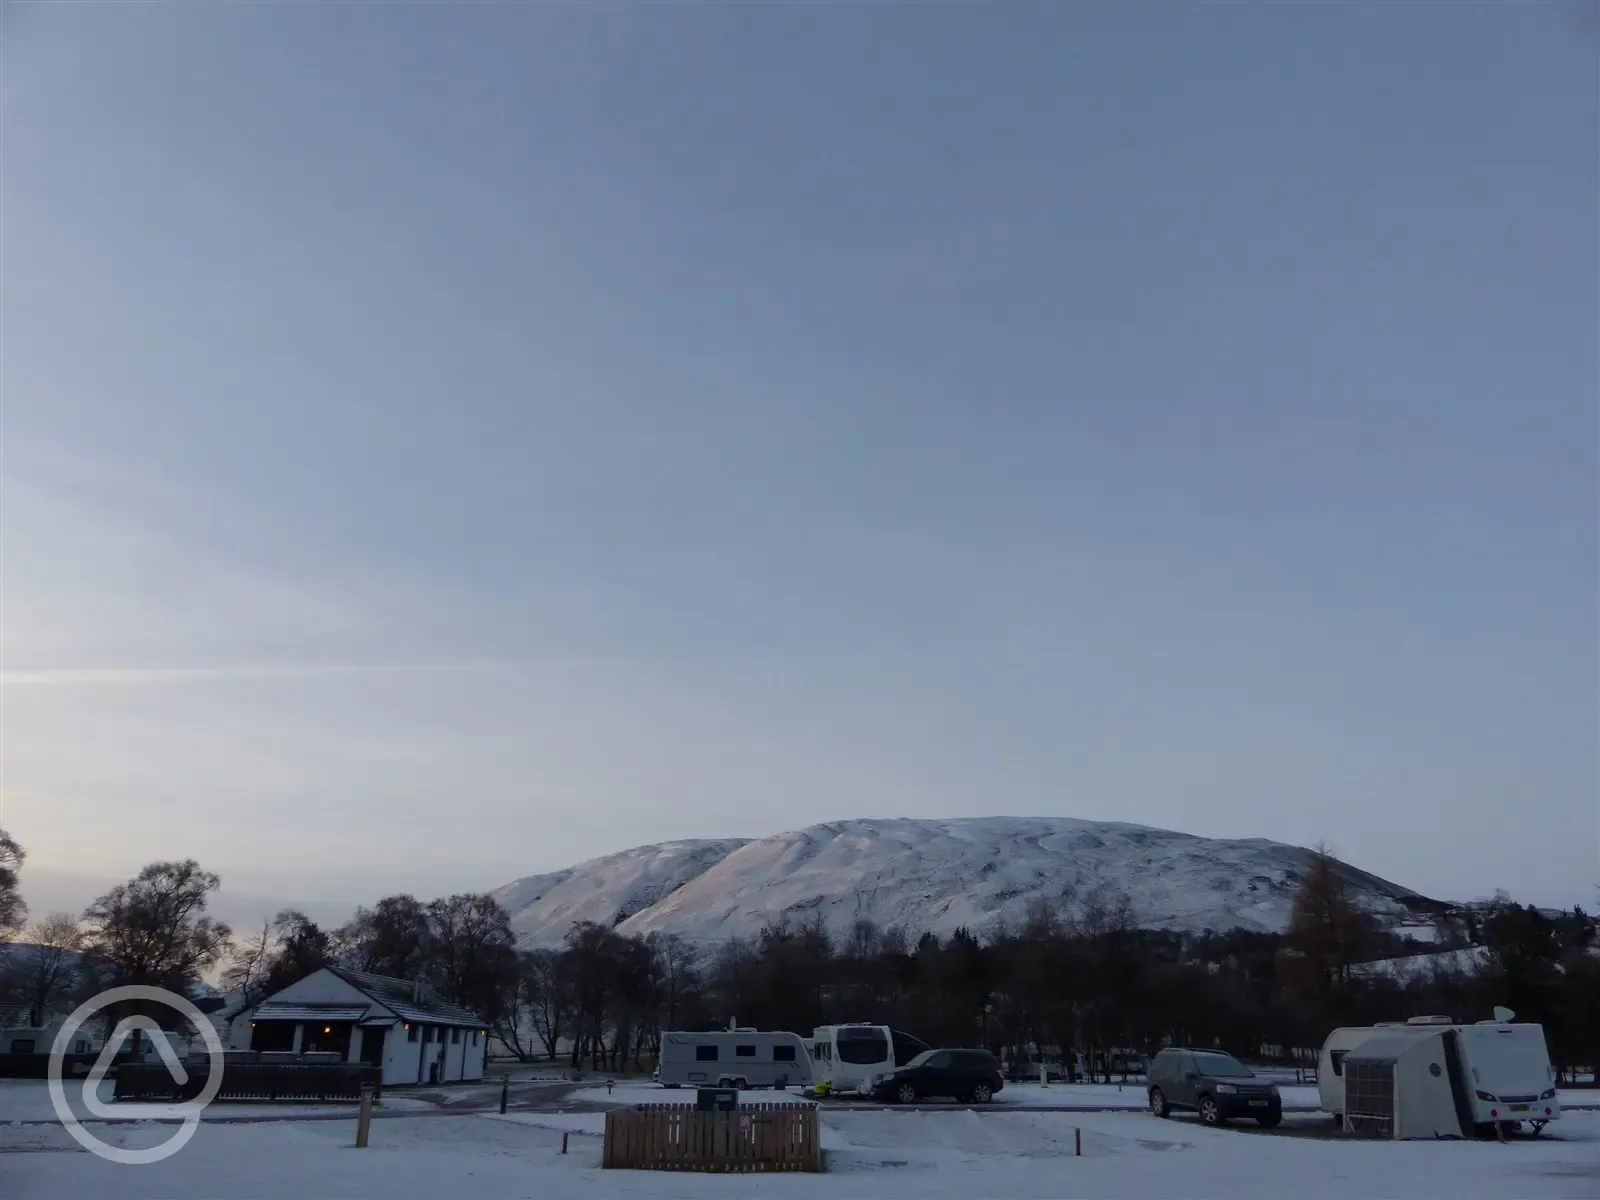 Fantastic spot for winter caravanning and camping